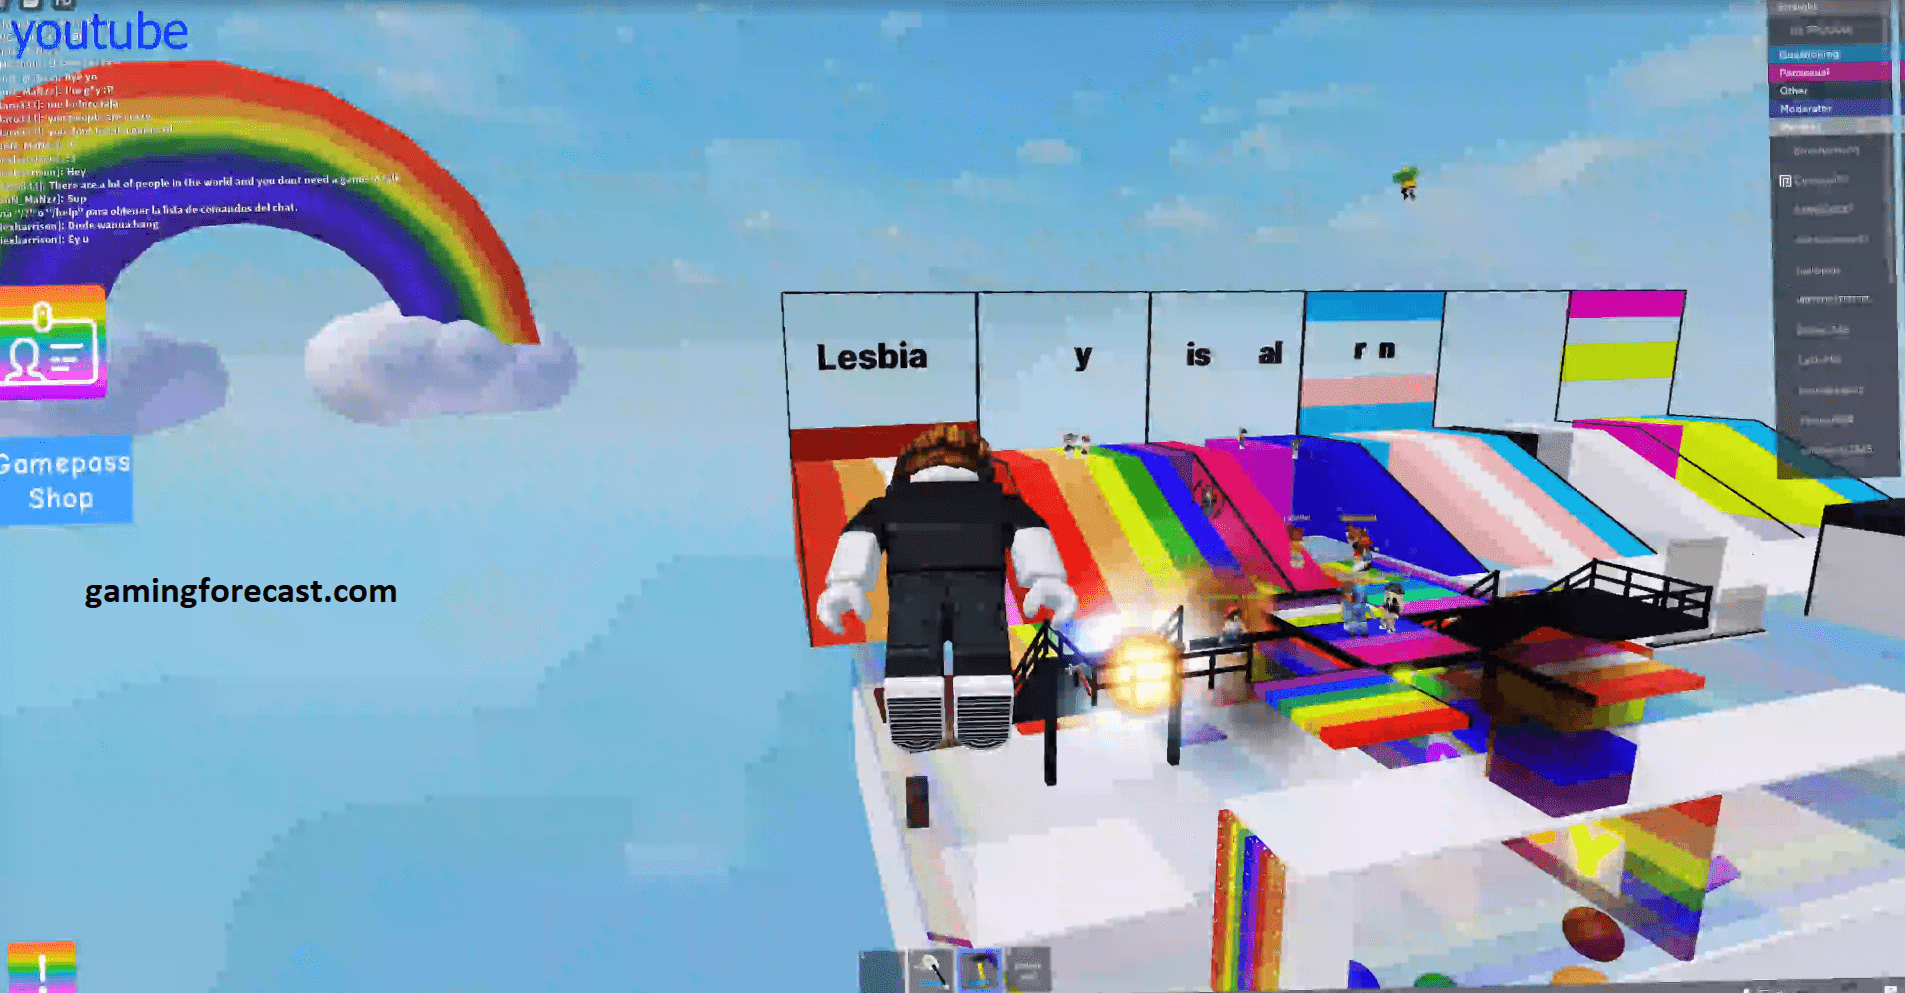 Roblox Hack Download Pc Destroy Lobby Fly Aimbot Scripts 2021 Gaming Forecast Download Free Online Game Hacks - free roblox pc download